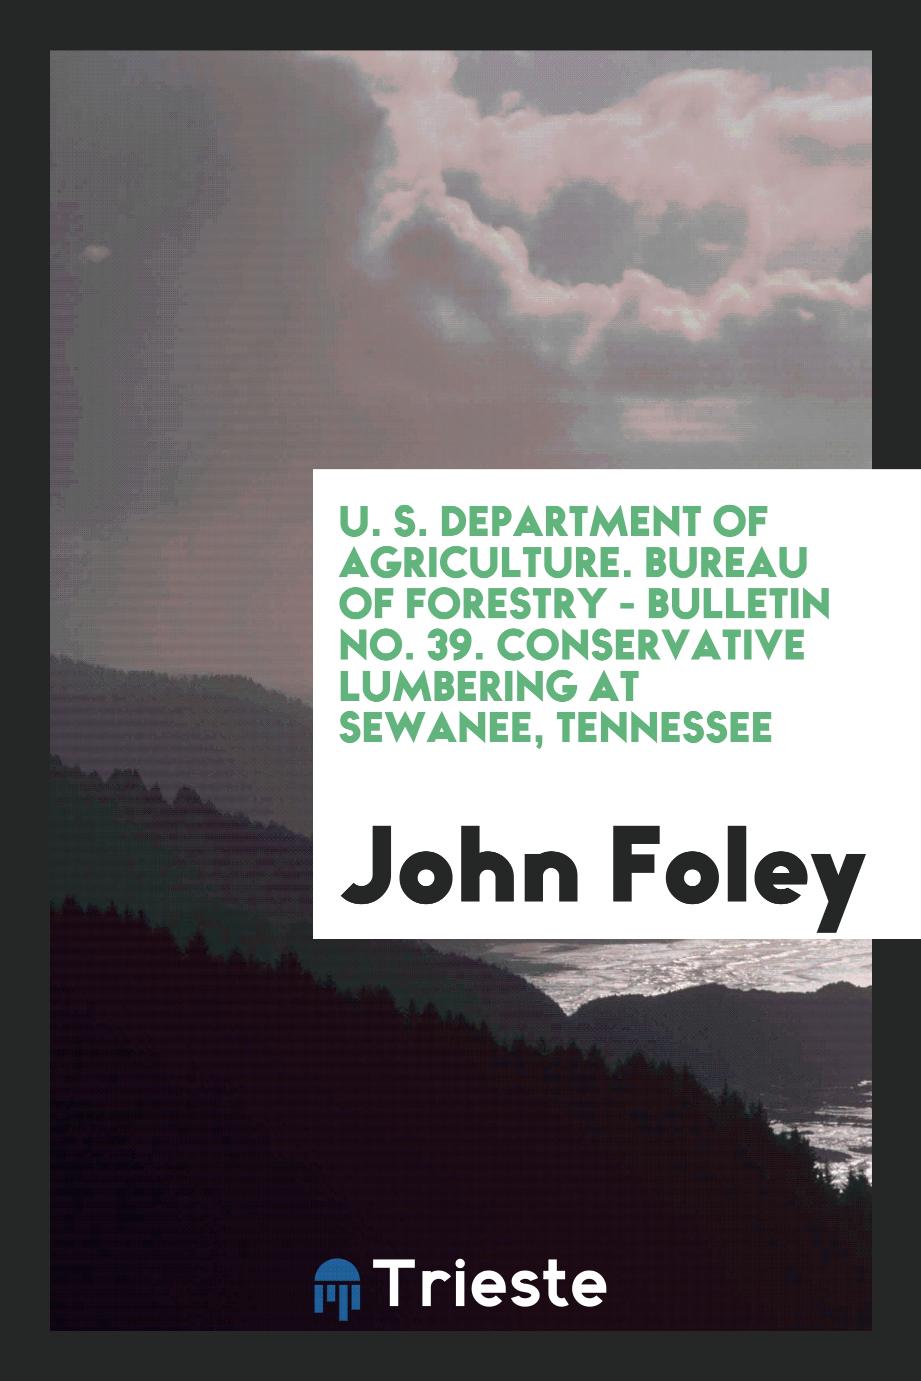 U. S. Department of agriculture. Bureau of forestry - Bulletin No. 39. Conservative Lumbering at Sewanee, Tennessee